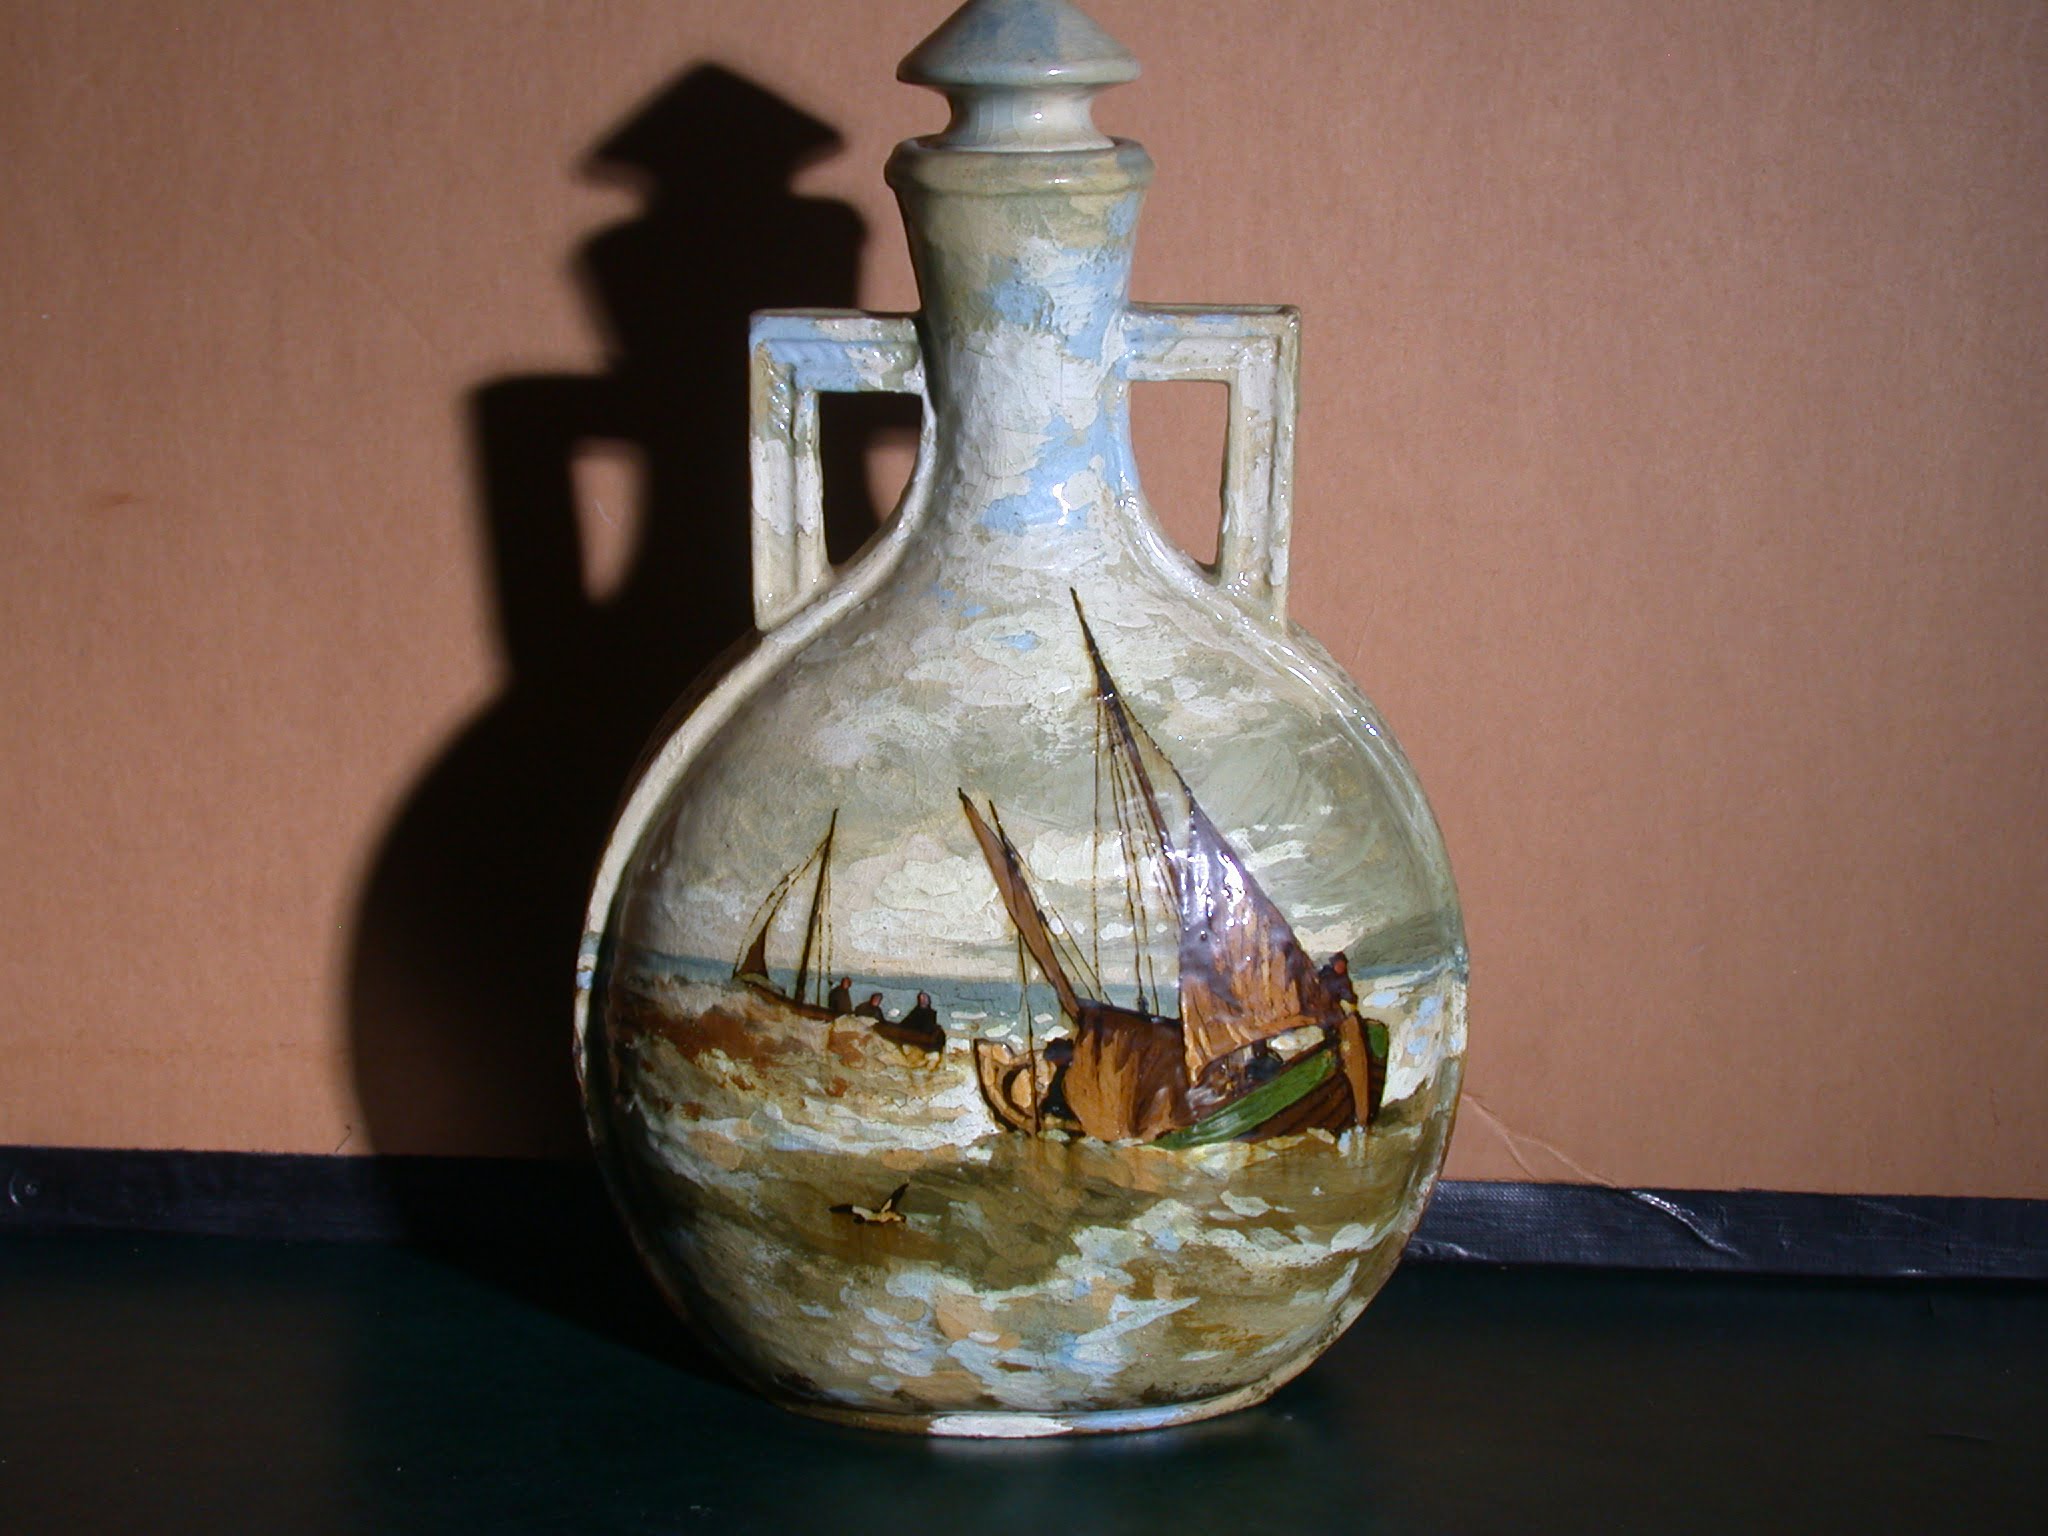 A ceramic jug, with an ocean scene depicting a pair of small boats in the waves.